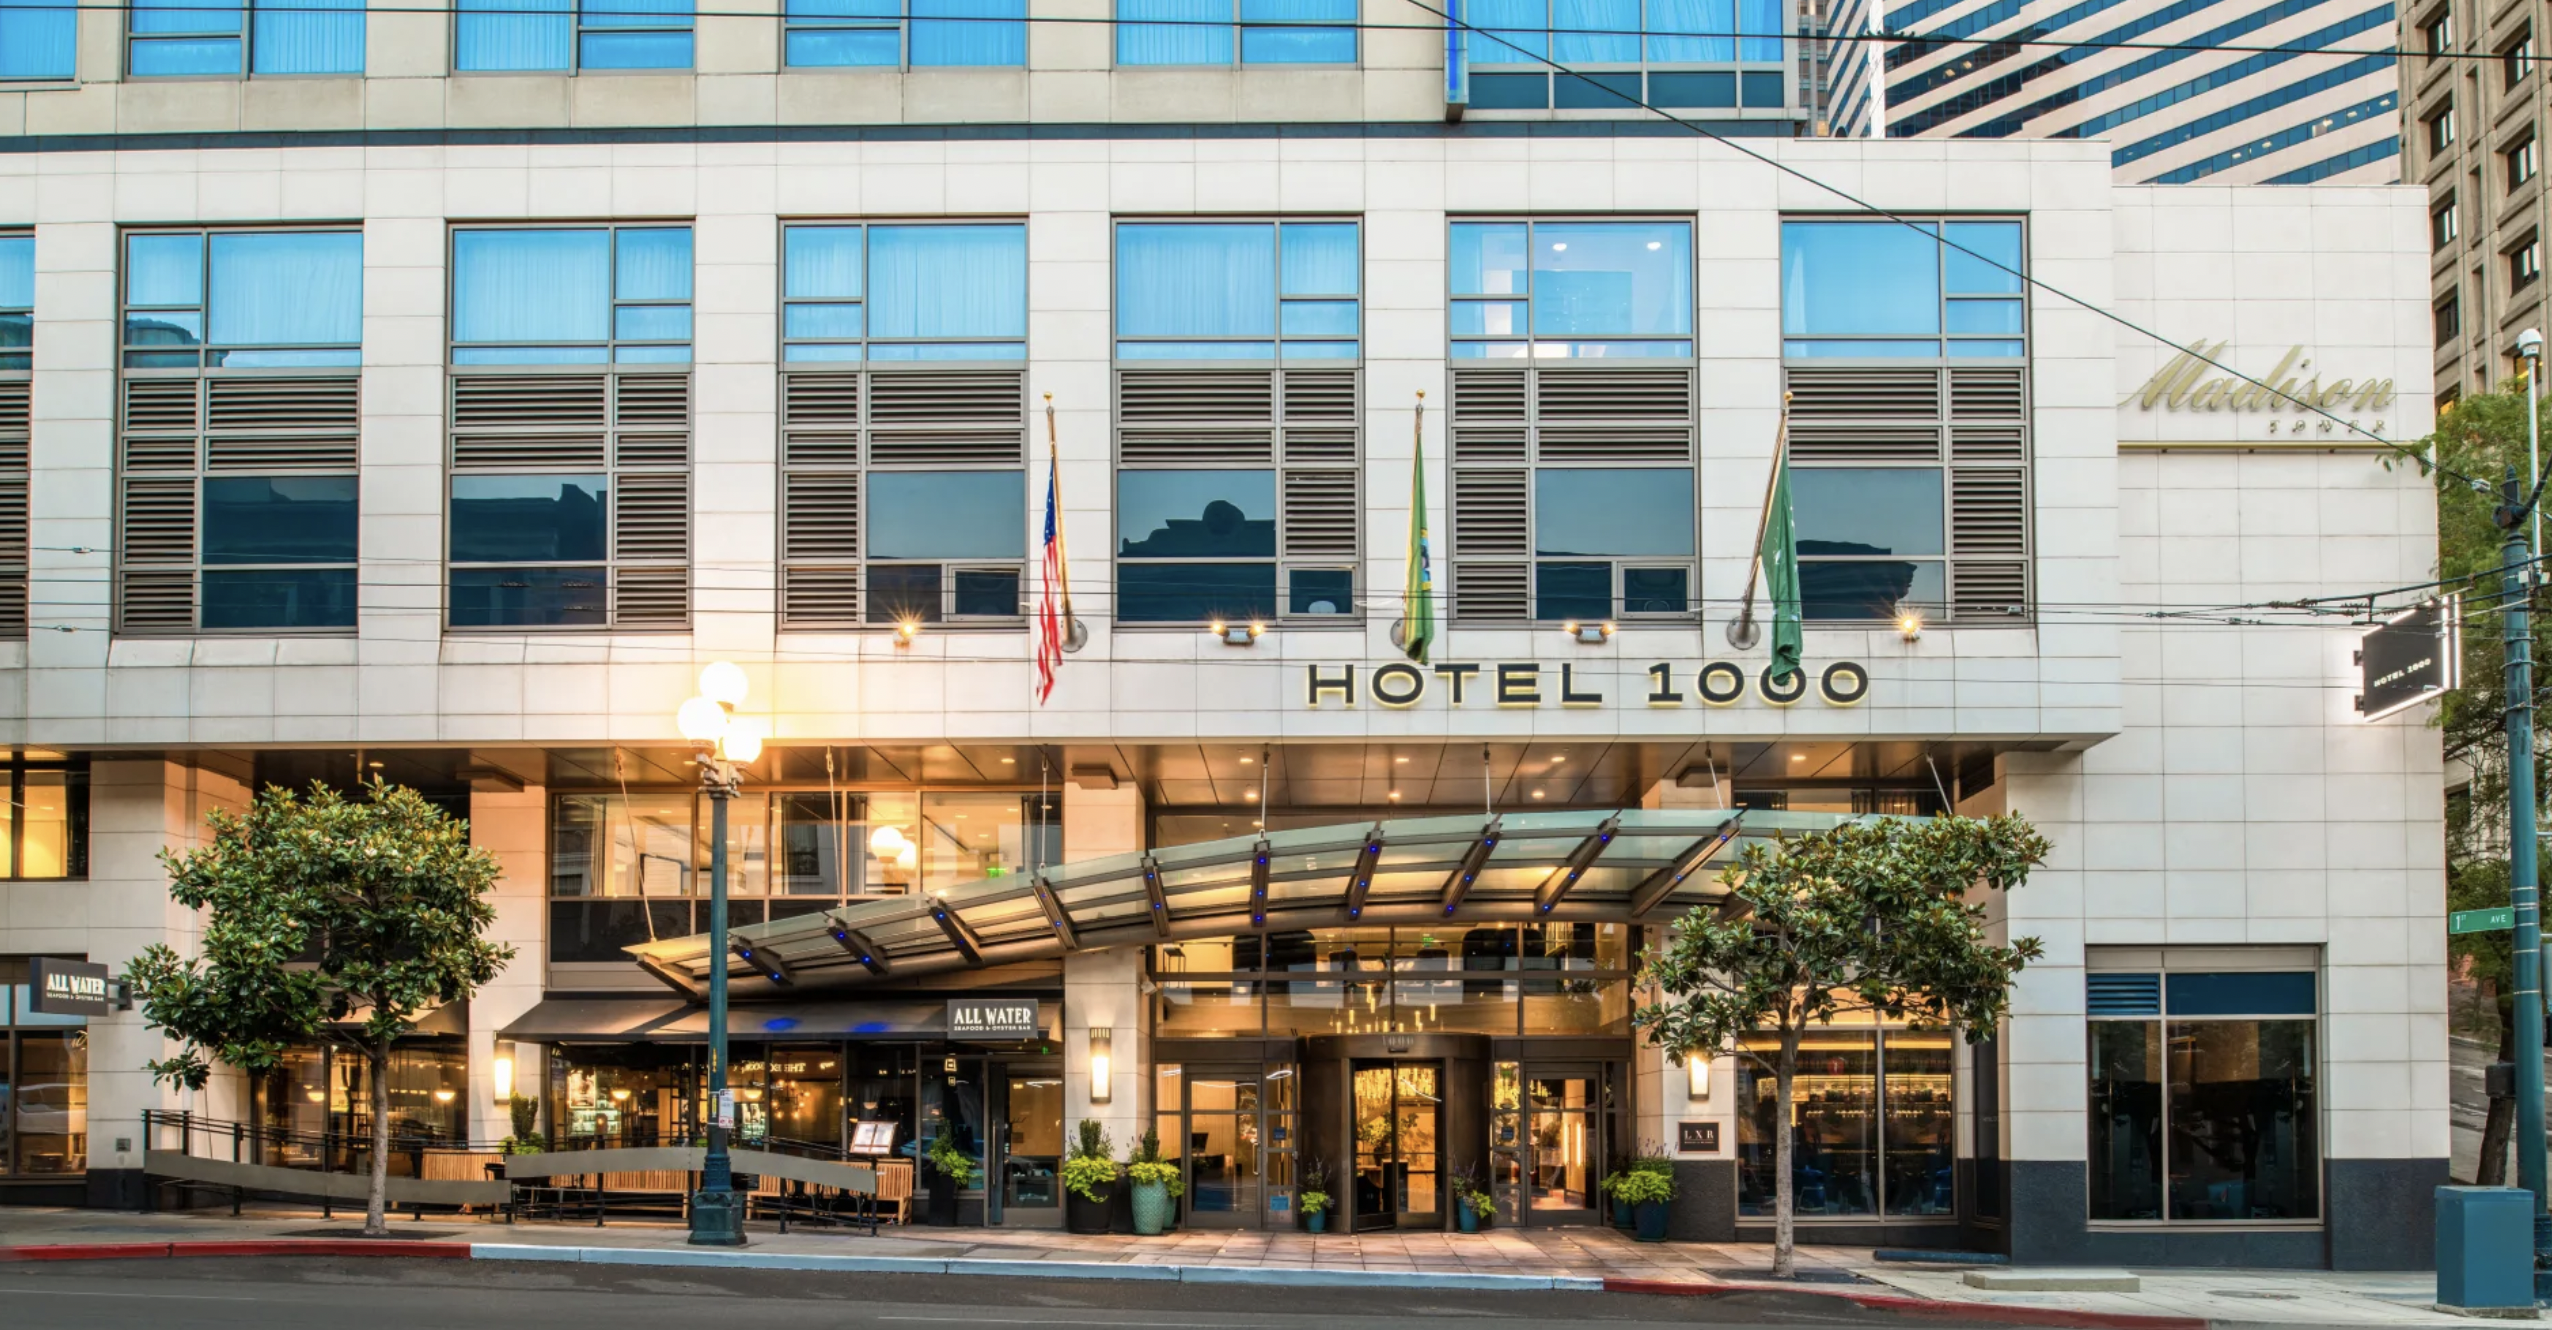 <p><b>Average price per night:</b> $223</p><p>When Loews Hotel 1000 Seattle opened in 2006, it led the way in hotel technology by introducing a high-speed network for smart systems throughout the property, and it consistently maintained this tech-savvy approach. <a href="https://www.loewshotels.com/press/press-releases/loews-hotel-1000-seattle-completes-multi-million-dollar-renovation">Located in the tech-savvy</a>, rainy heart of downtown, Loews Hotel 1000 Seatle features a virtual reality golf club, that allows guests to play on over 50 top golf courses without leaving the hotel. Rooms are equipped with media hubs and a VoIP phone system for free international calls. Innovative heat-detection sensors in the rooms help manage climate control and notify housekeeping of occupancy, eliminating the need for "Do Not Disturb" signs.</p>